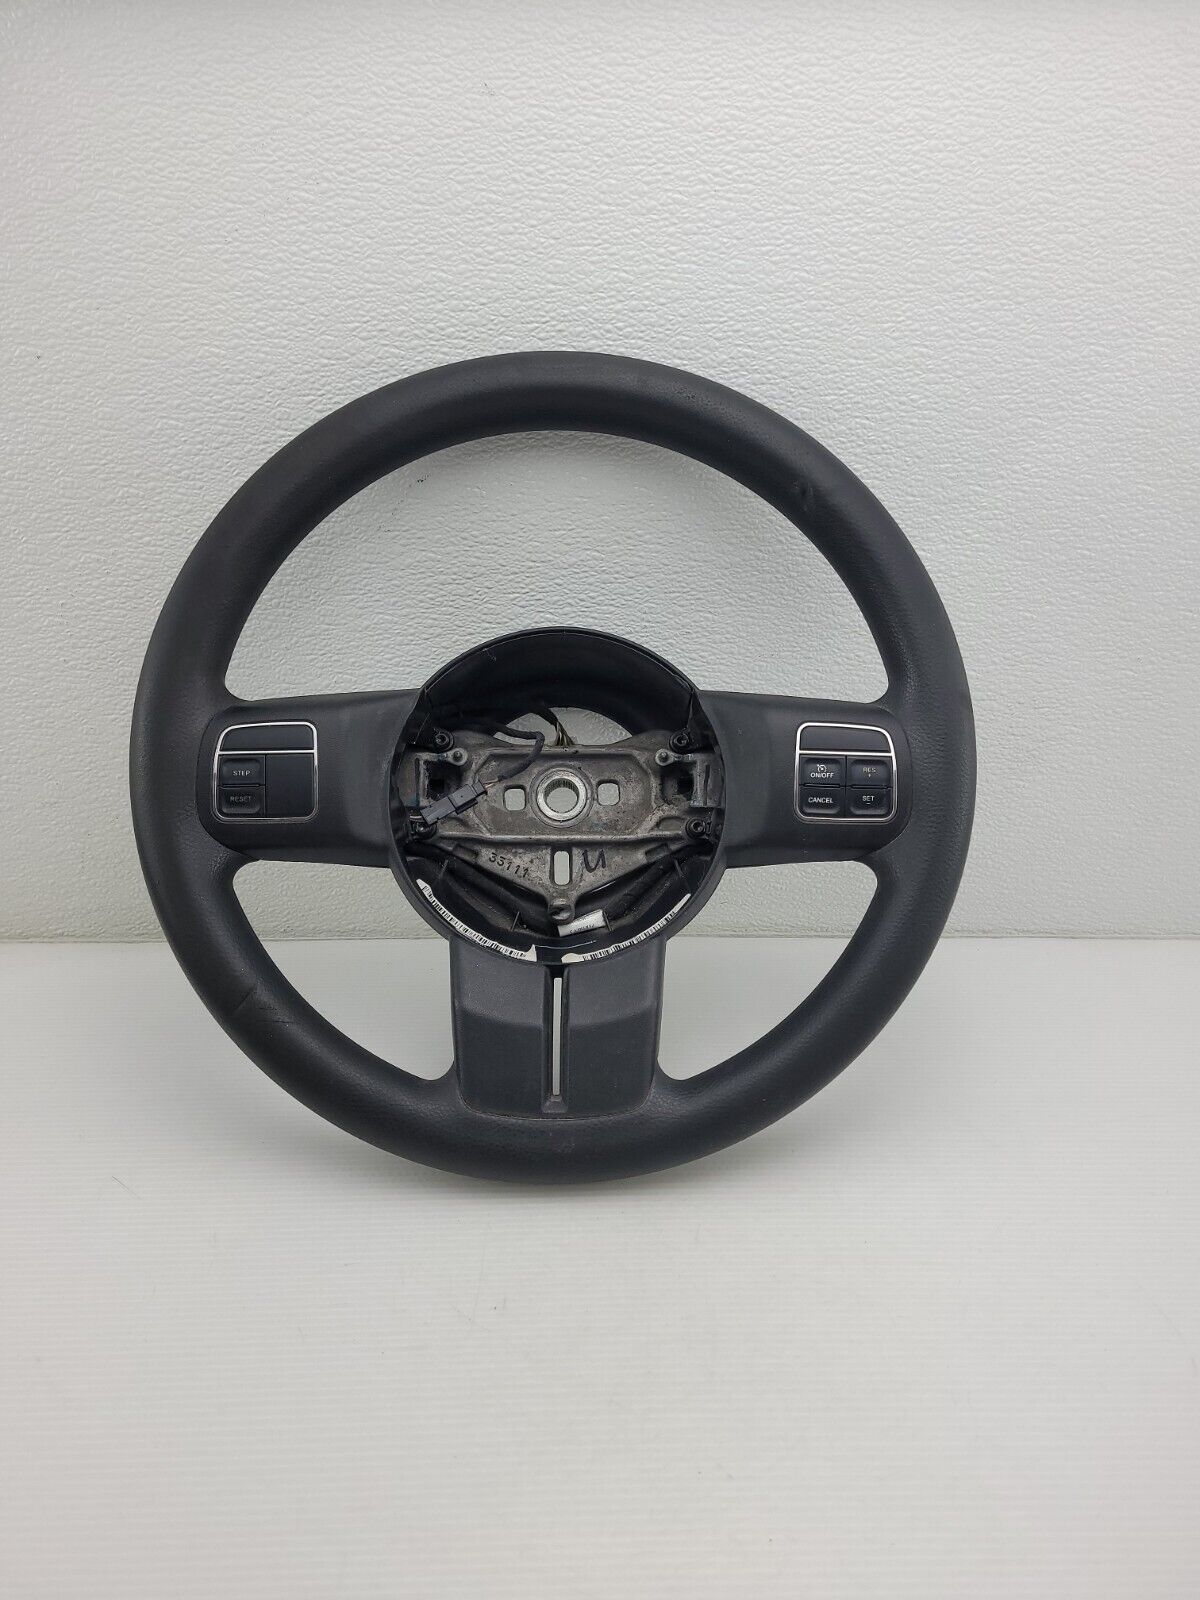 2012 JEEP PATRIOT STEERING WHEEL WITH CRUISE CONTROL 1SL84XDVAF OEM 12 